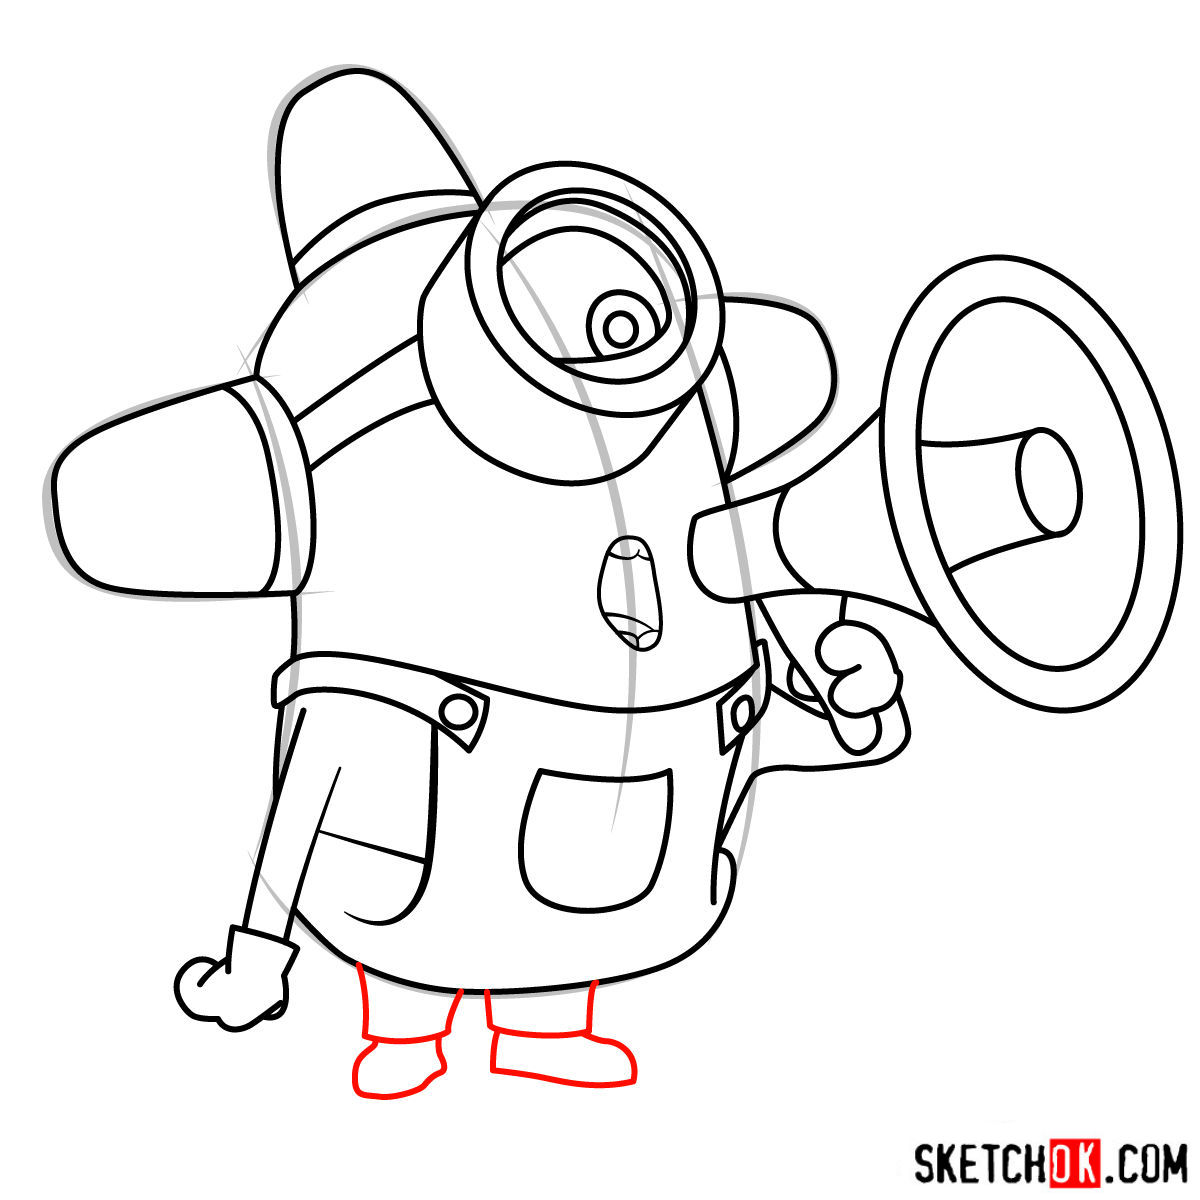 How to draw minion Carl with a loudspeaker - step 11